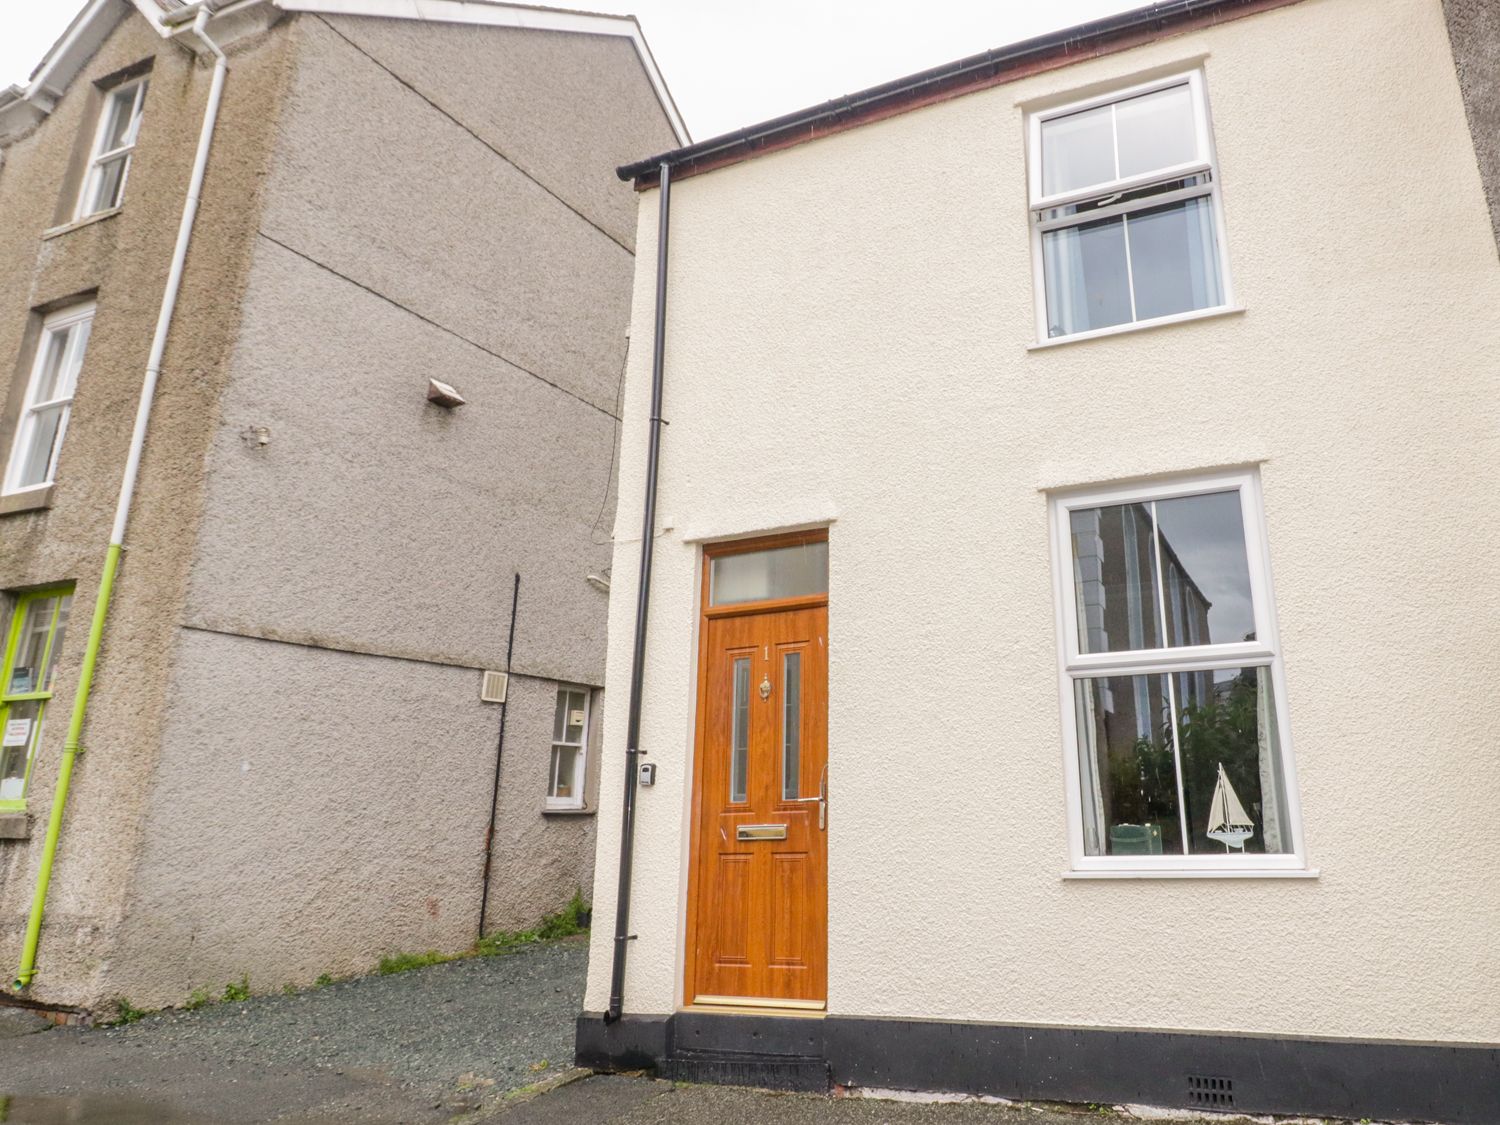 1 Castle Row - Anglesey - 978123 - photo 1